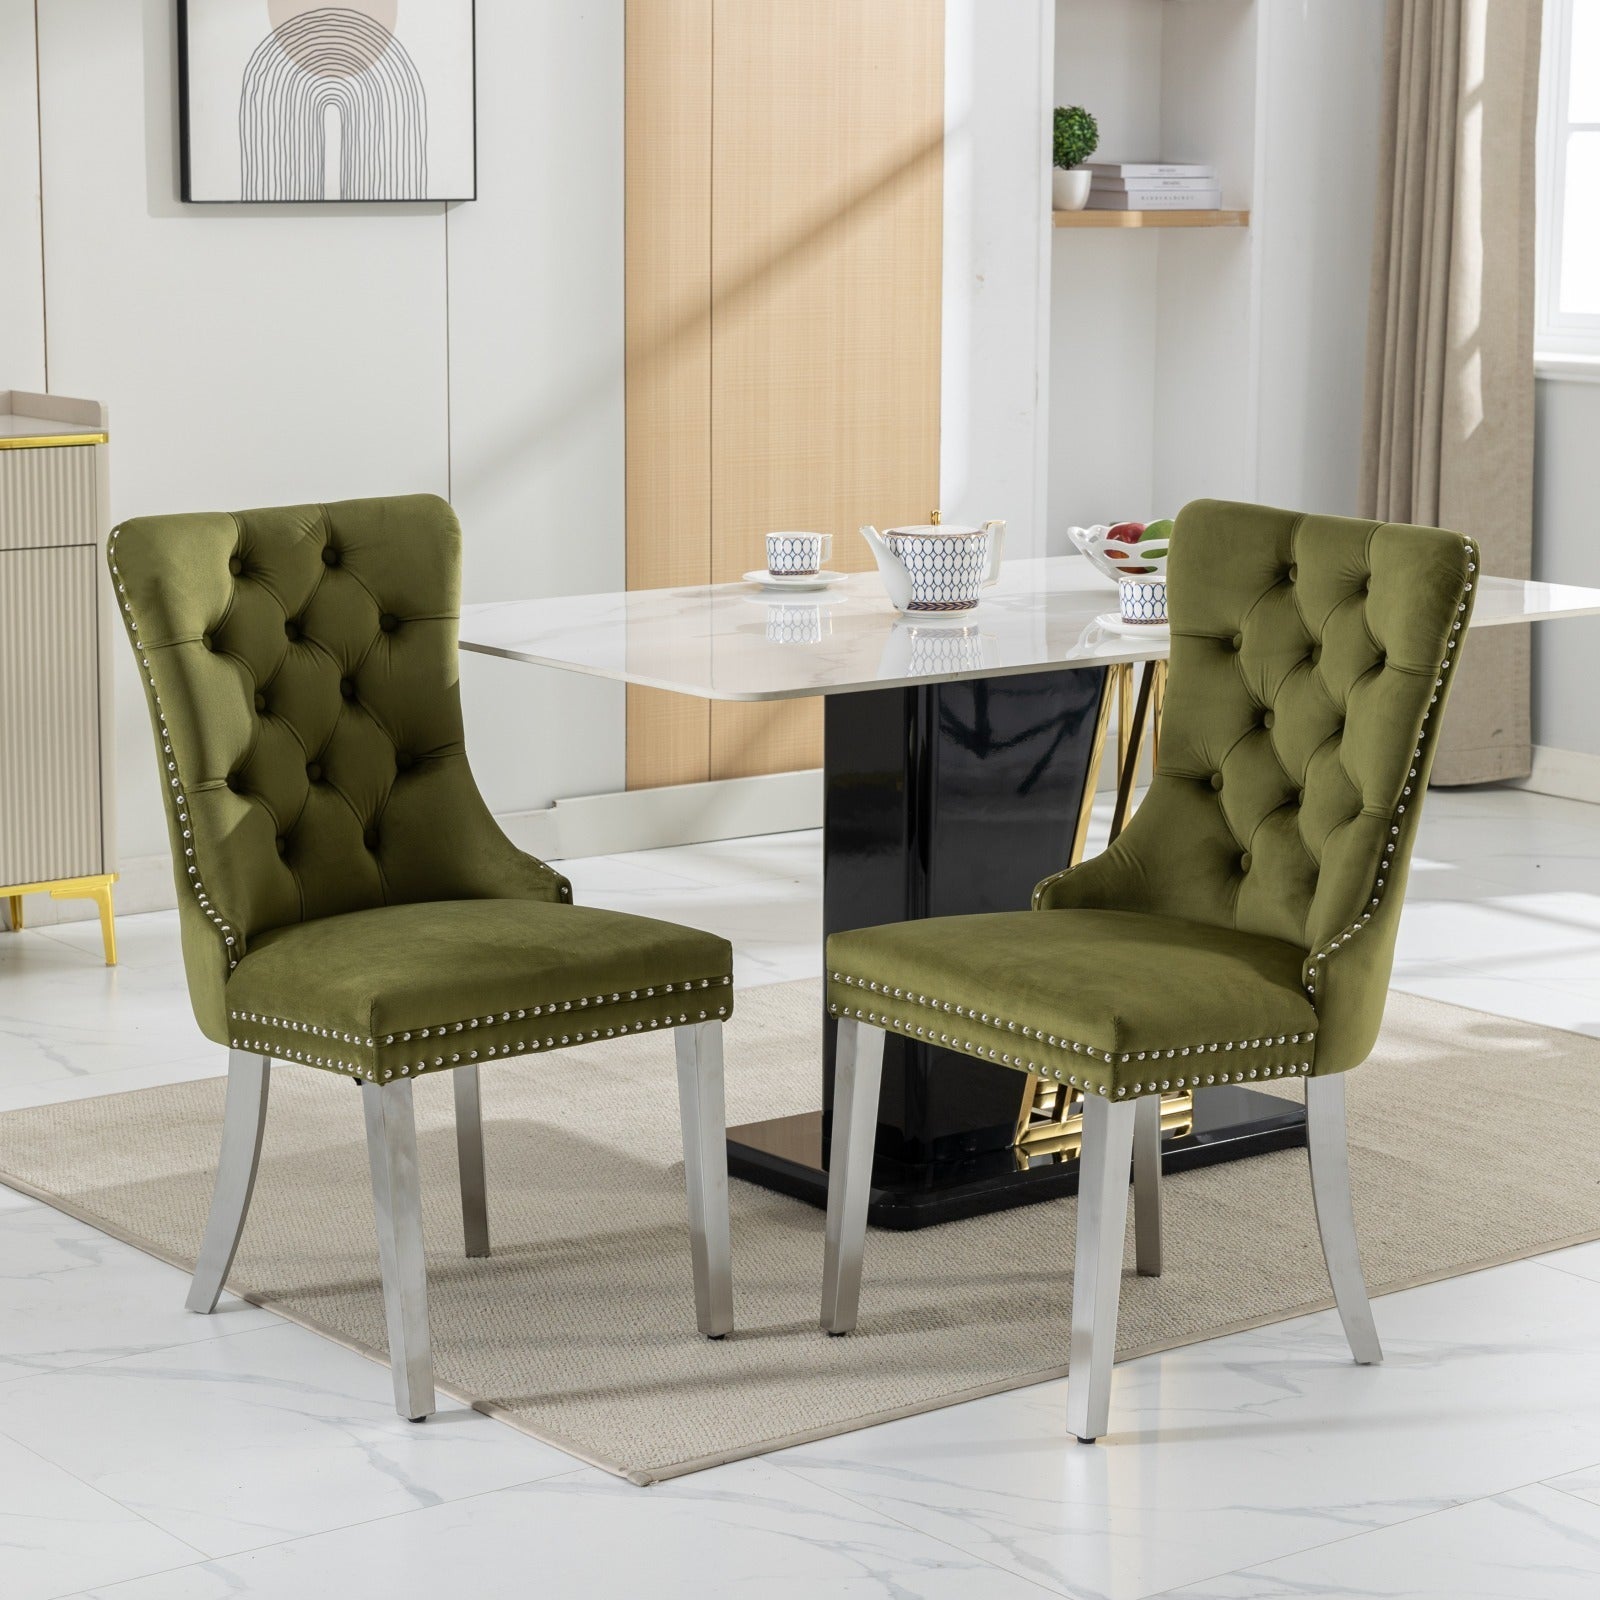 🆓🚛 High-End Tufted Solid Wood Contemporary Velvet Upholstered Dining Chair With Chrome Stainless Steel Plating Legs, Nailhead Trim, Set of 2, Olive-Green and Chrome